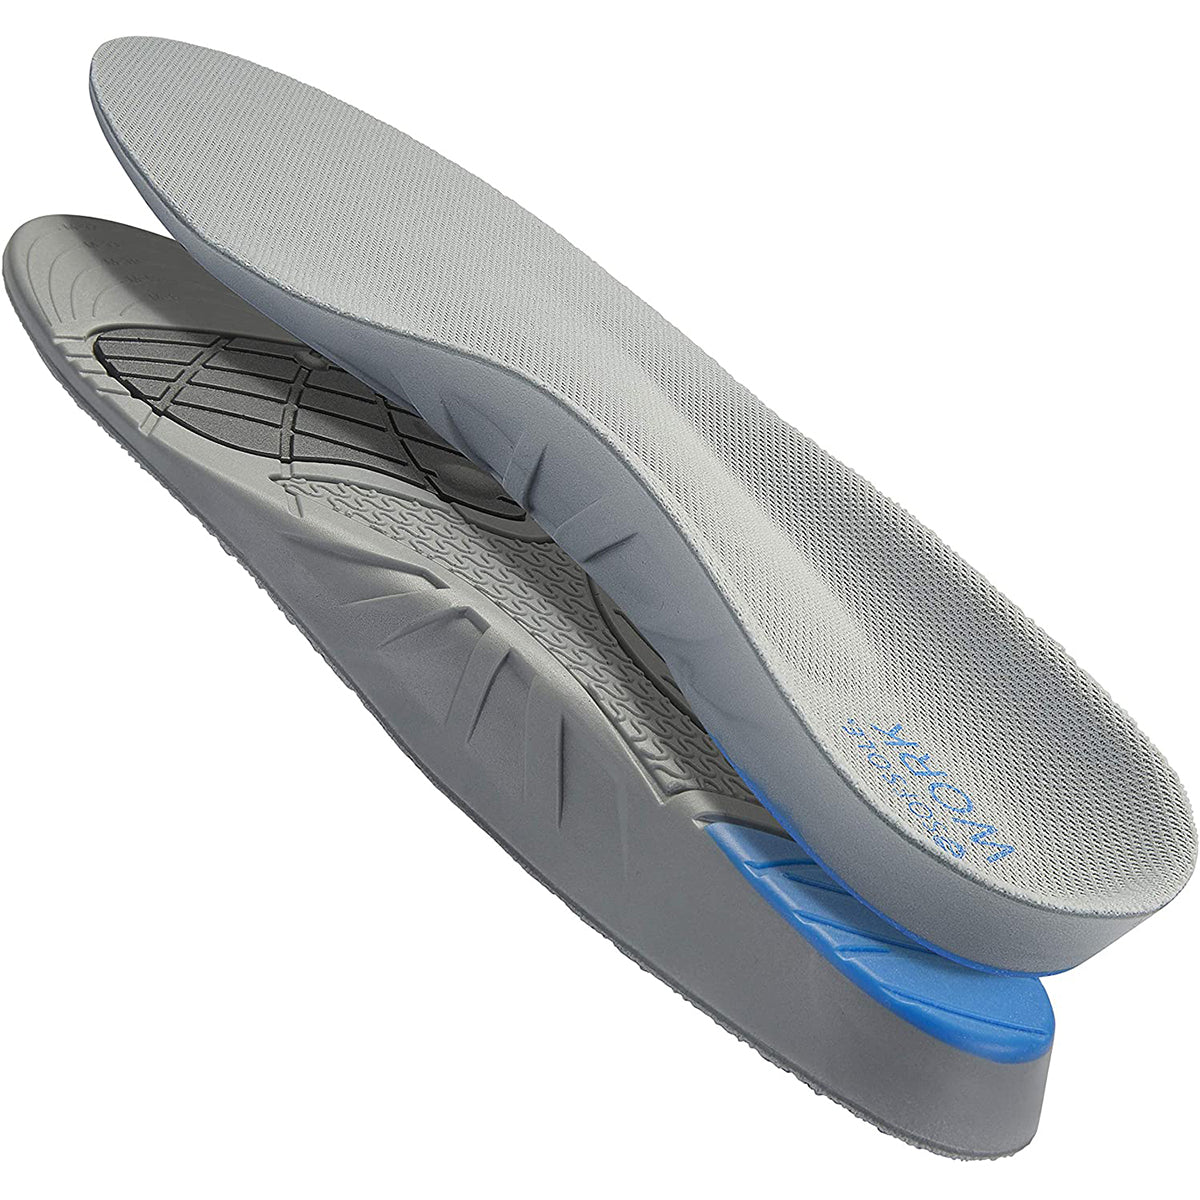 Sof Sole Full Length Work Shoe Insoles - Men's 8-13 SofSole